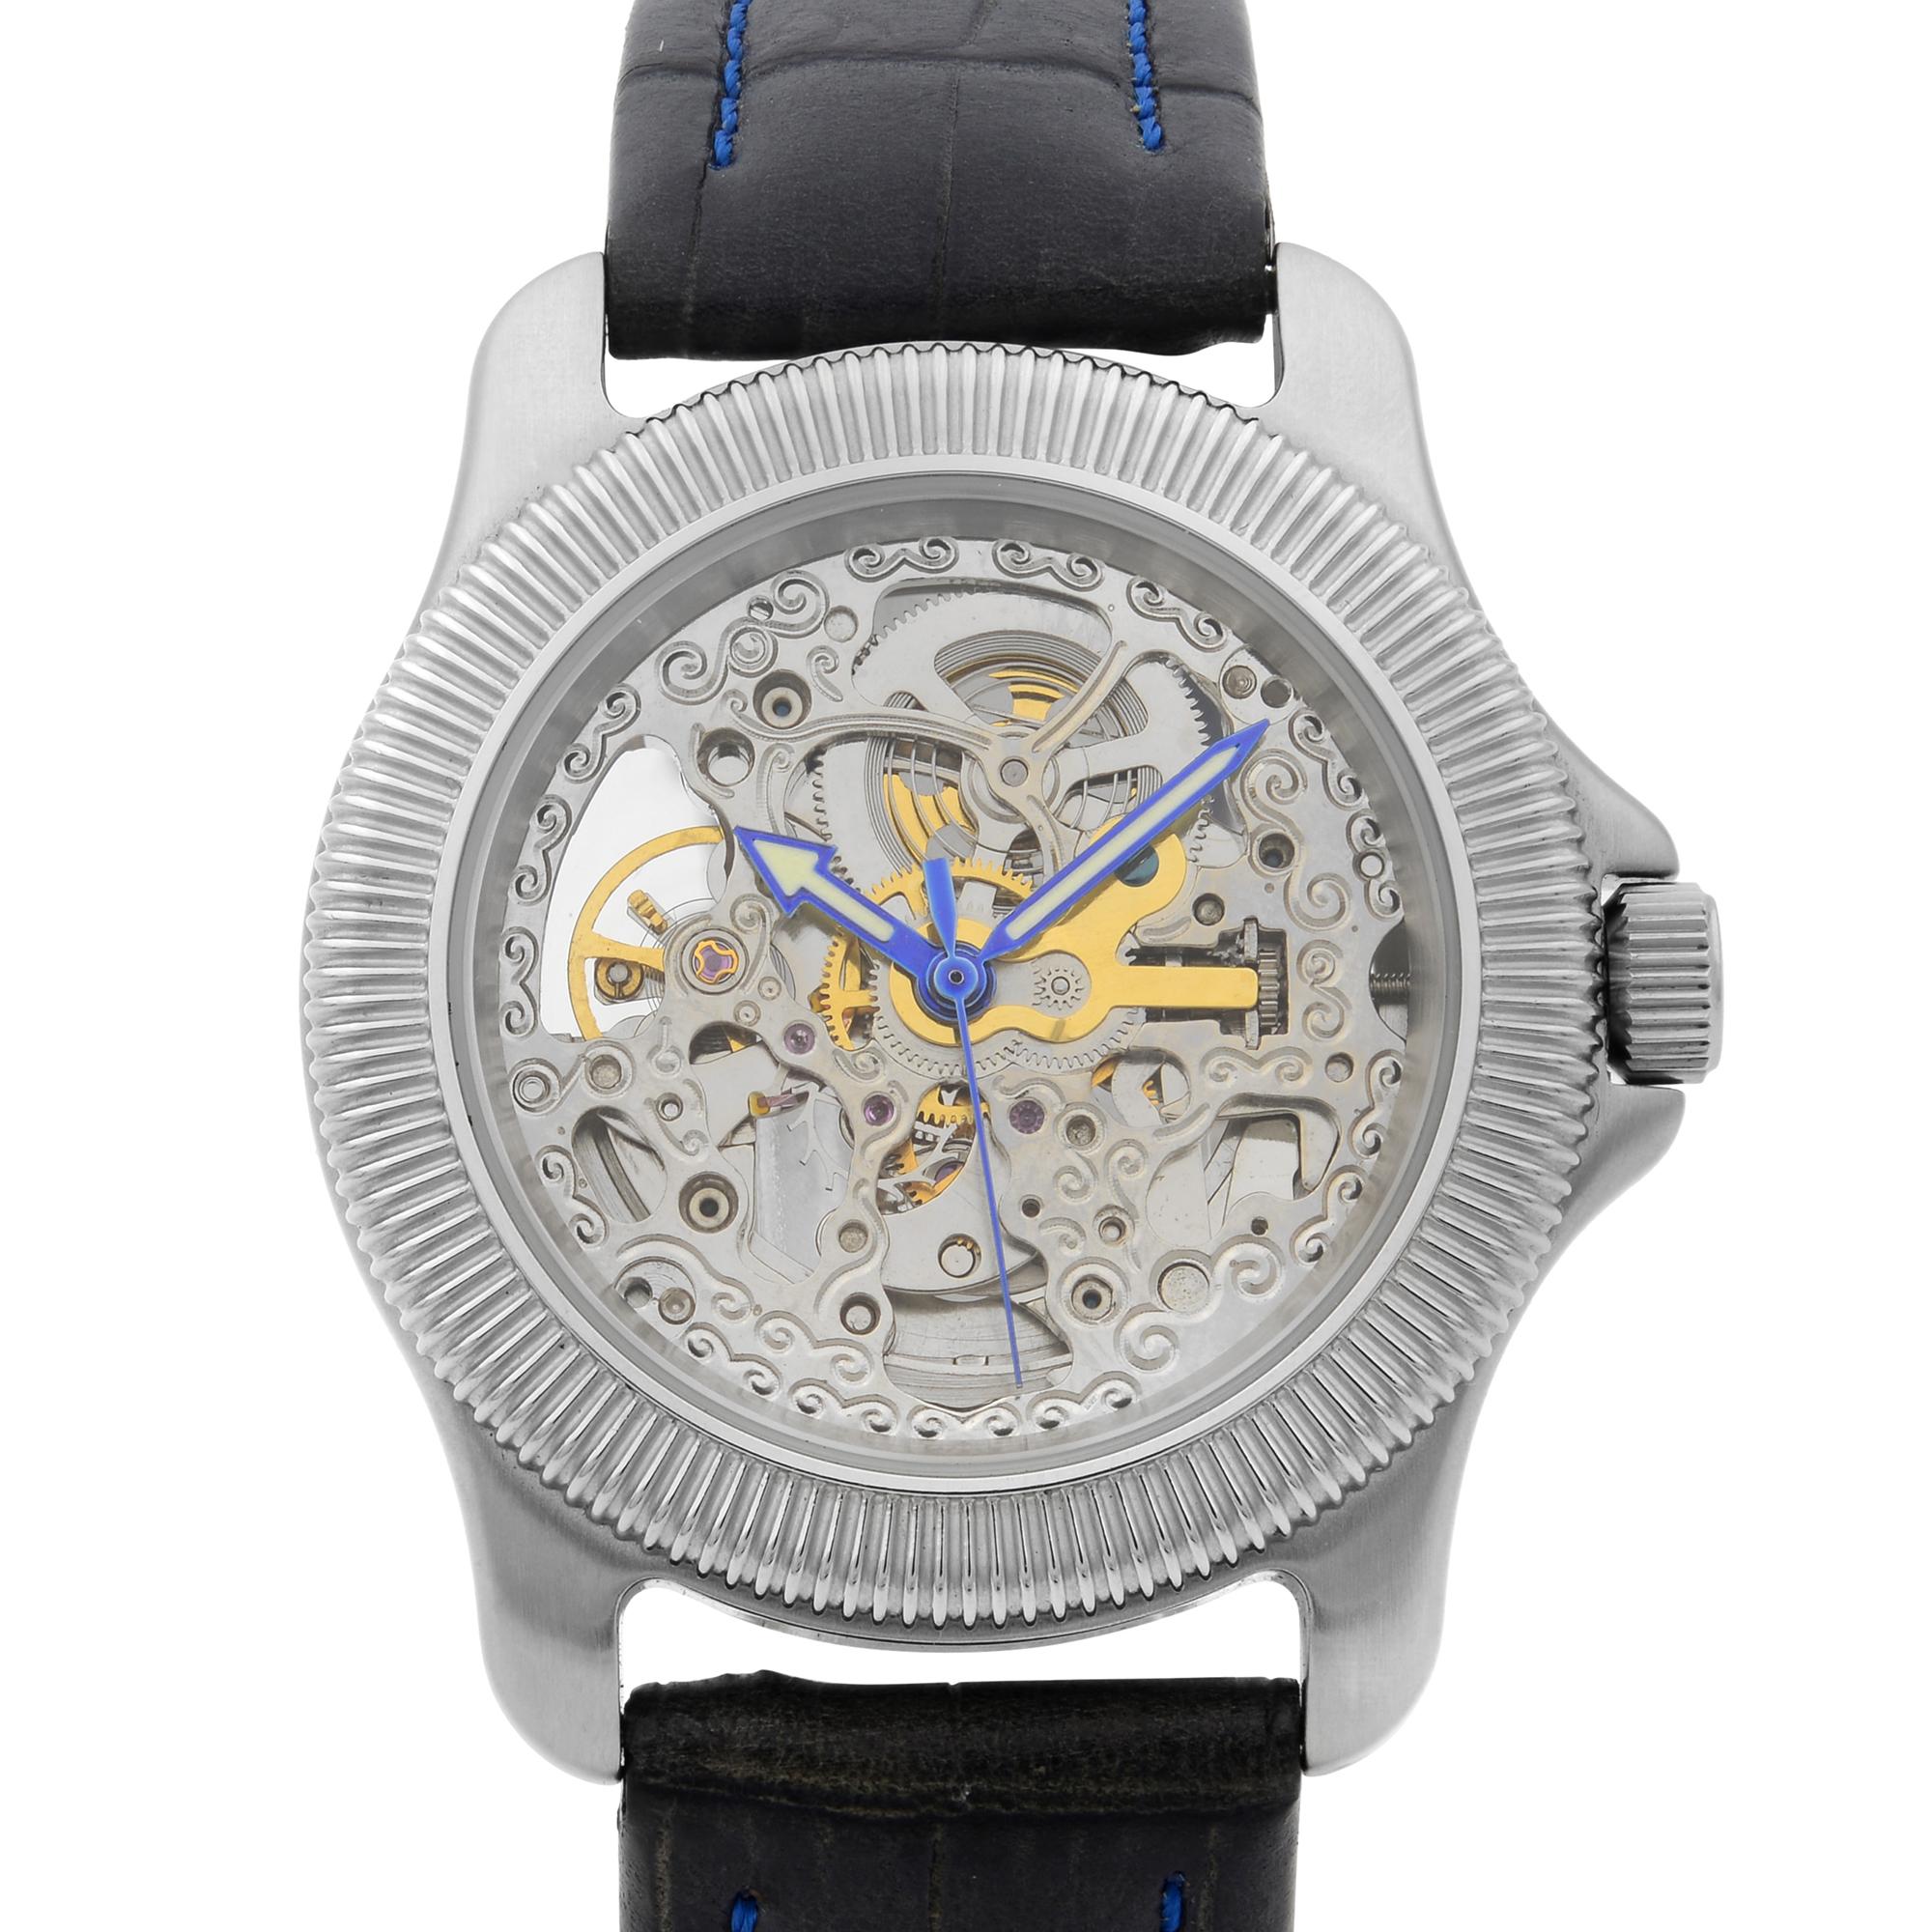 This display model Invicta Skeleton  N/A is a beautiful men's timepiece that is powered by mechanical (automatic) movement which is cased in a stainless steel case. It has a round shape face, no features dial and has hand unspecified style markers.